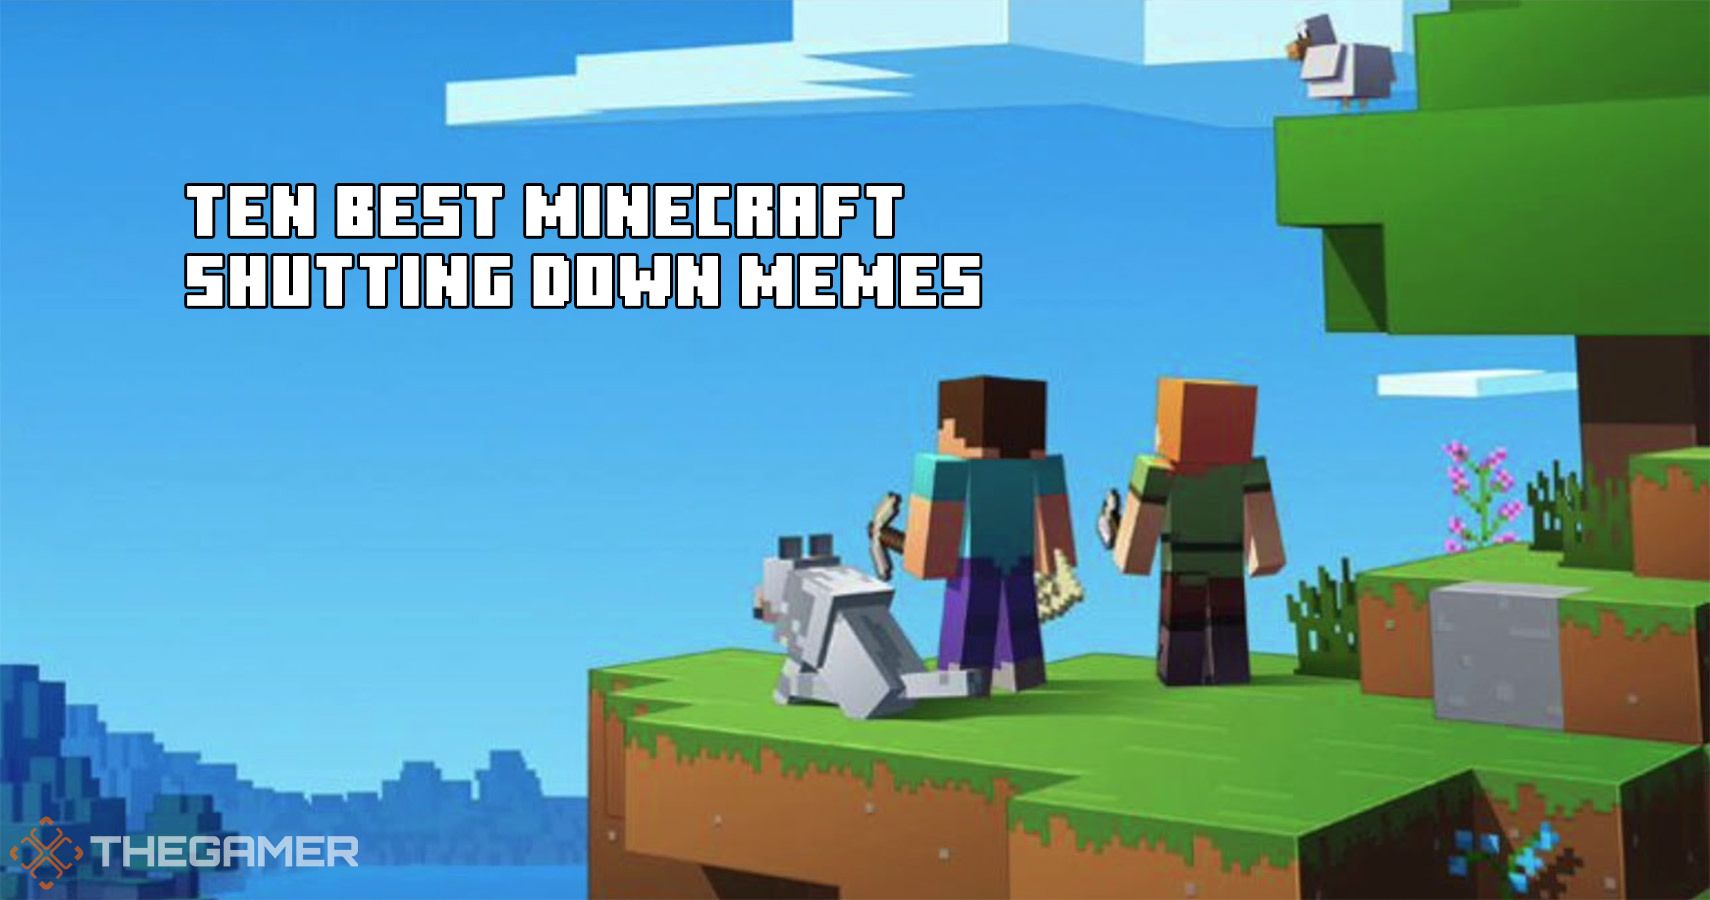 10 Best Minecraft Shutting Down Memes - meme in the roblox game gues the memes game